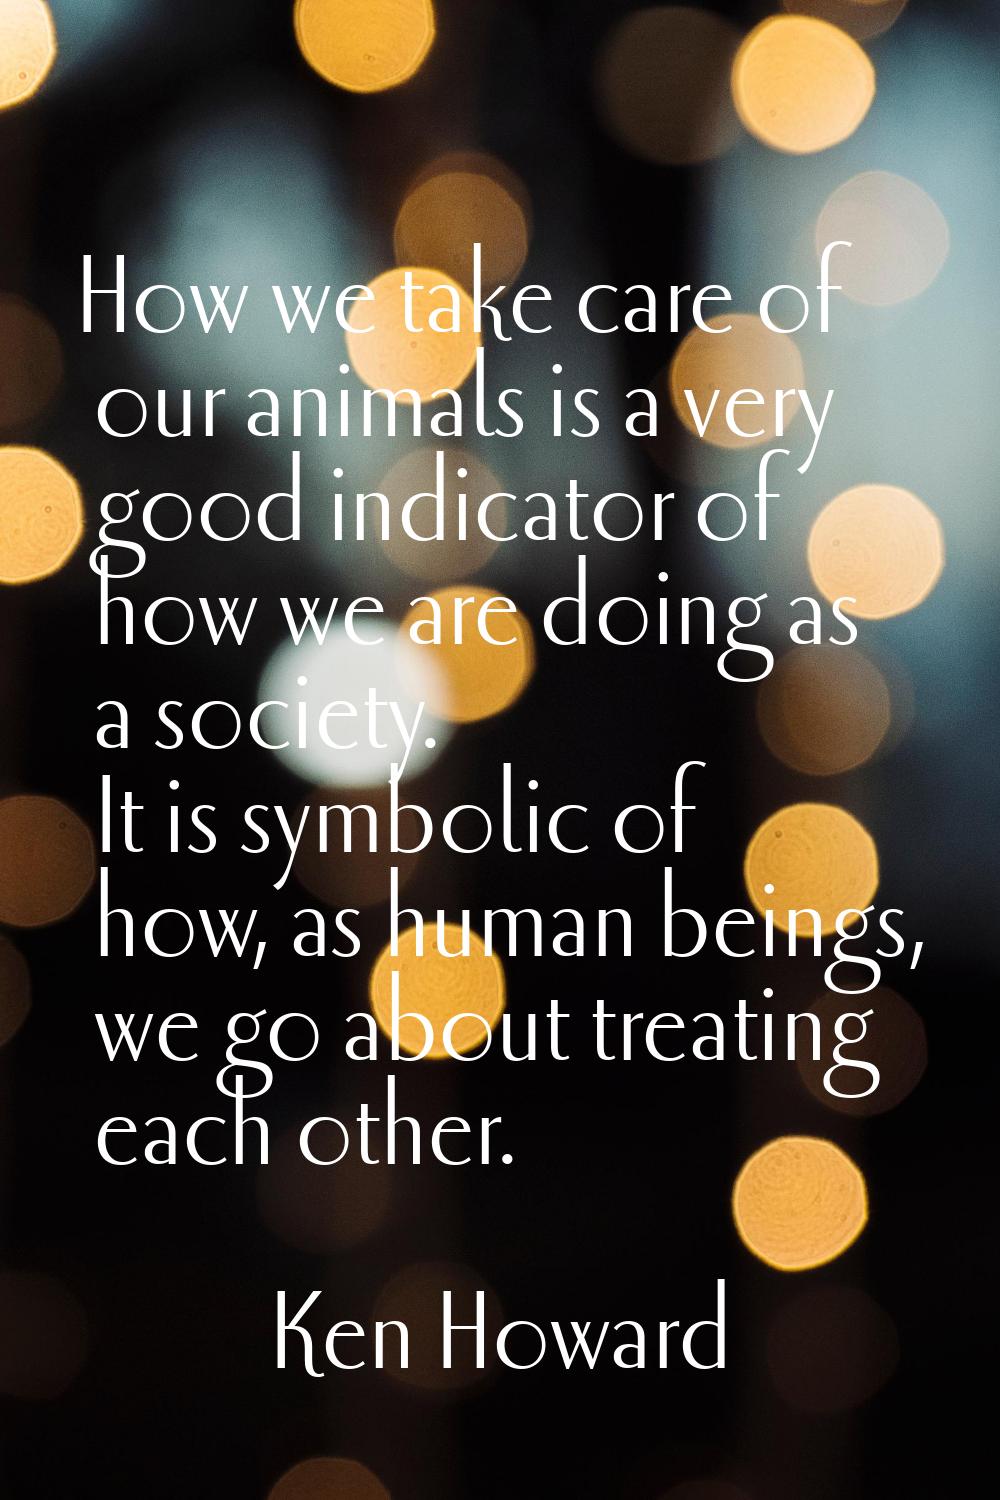 How we take care of our animals is a very good indicator of how we are doing as a society. It is sy